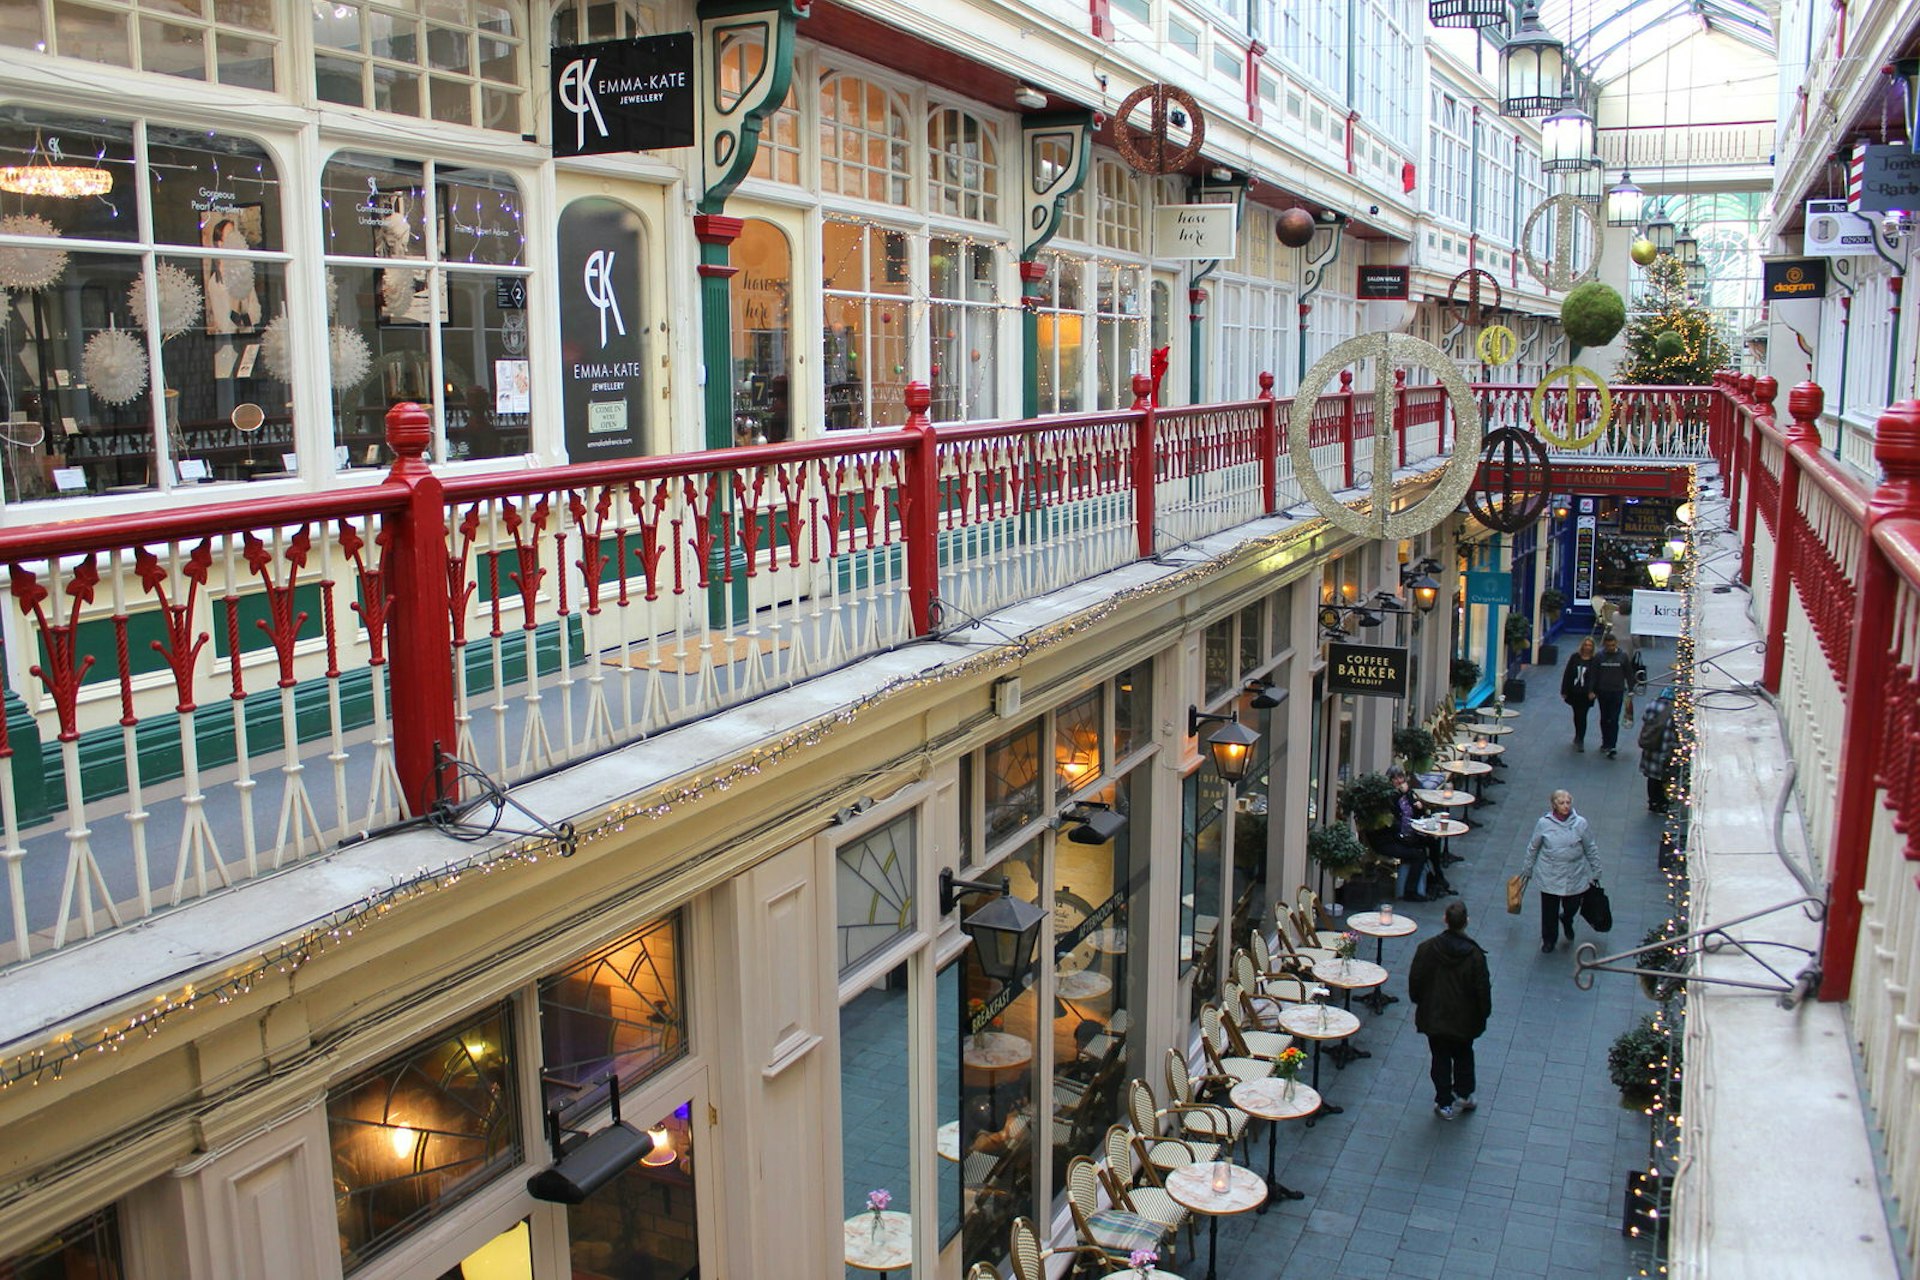 Peeking down from the 1st floor balcony of Castle Arcade in Cardiff, Wales © Amy Pay / Lonely Planet